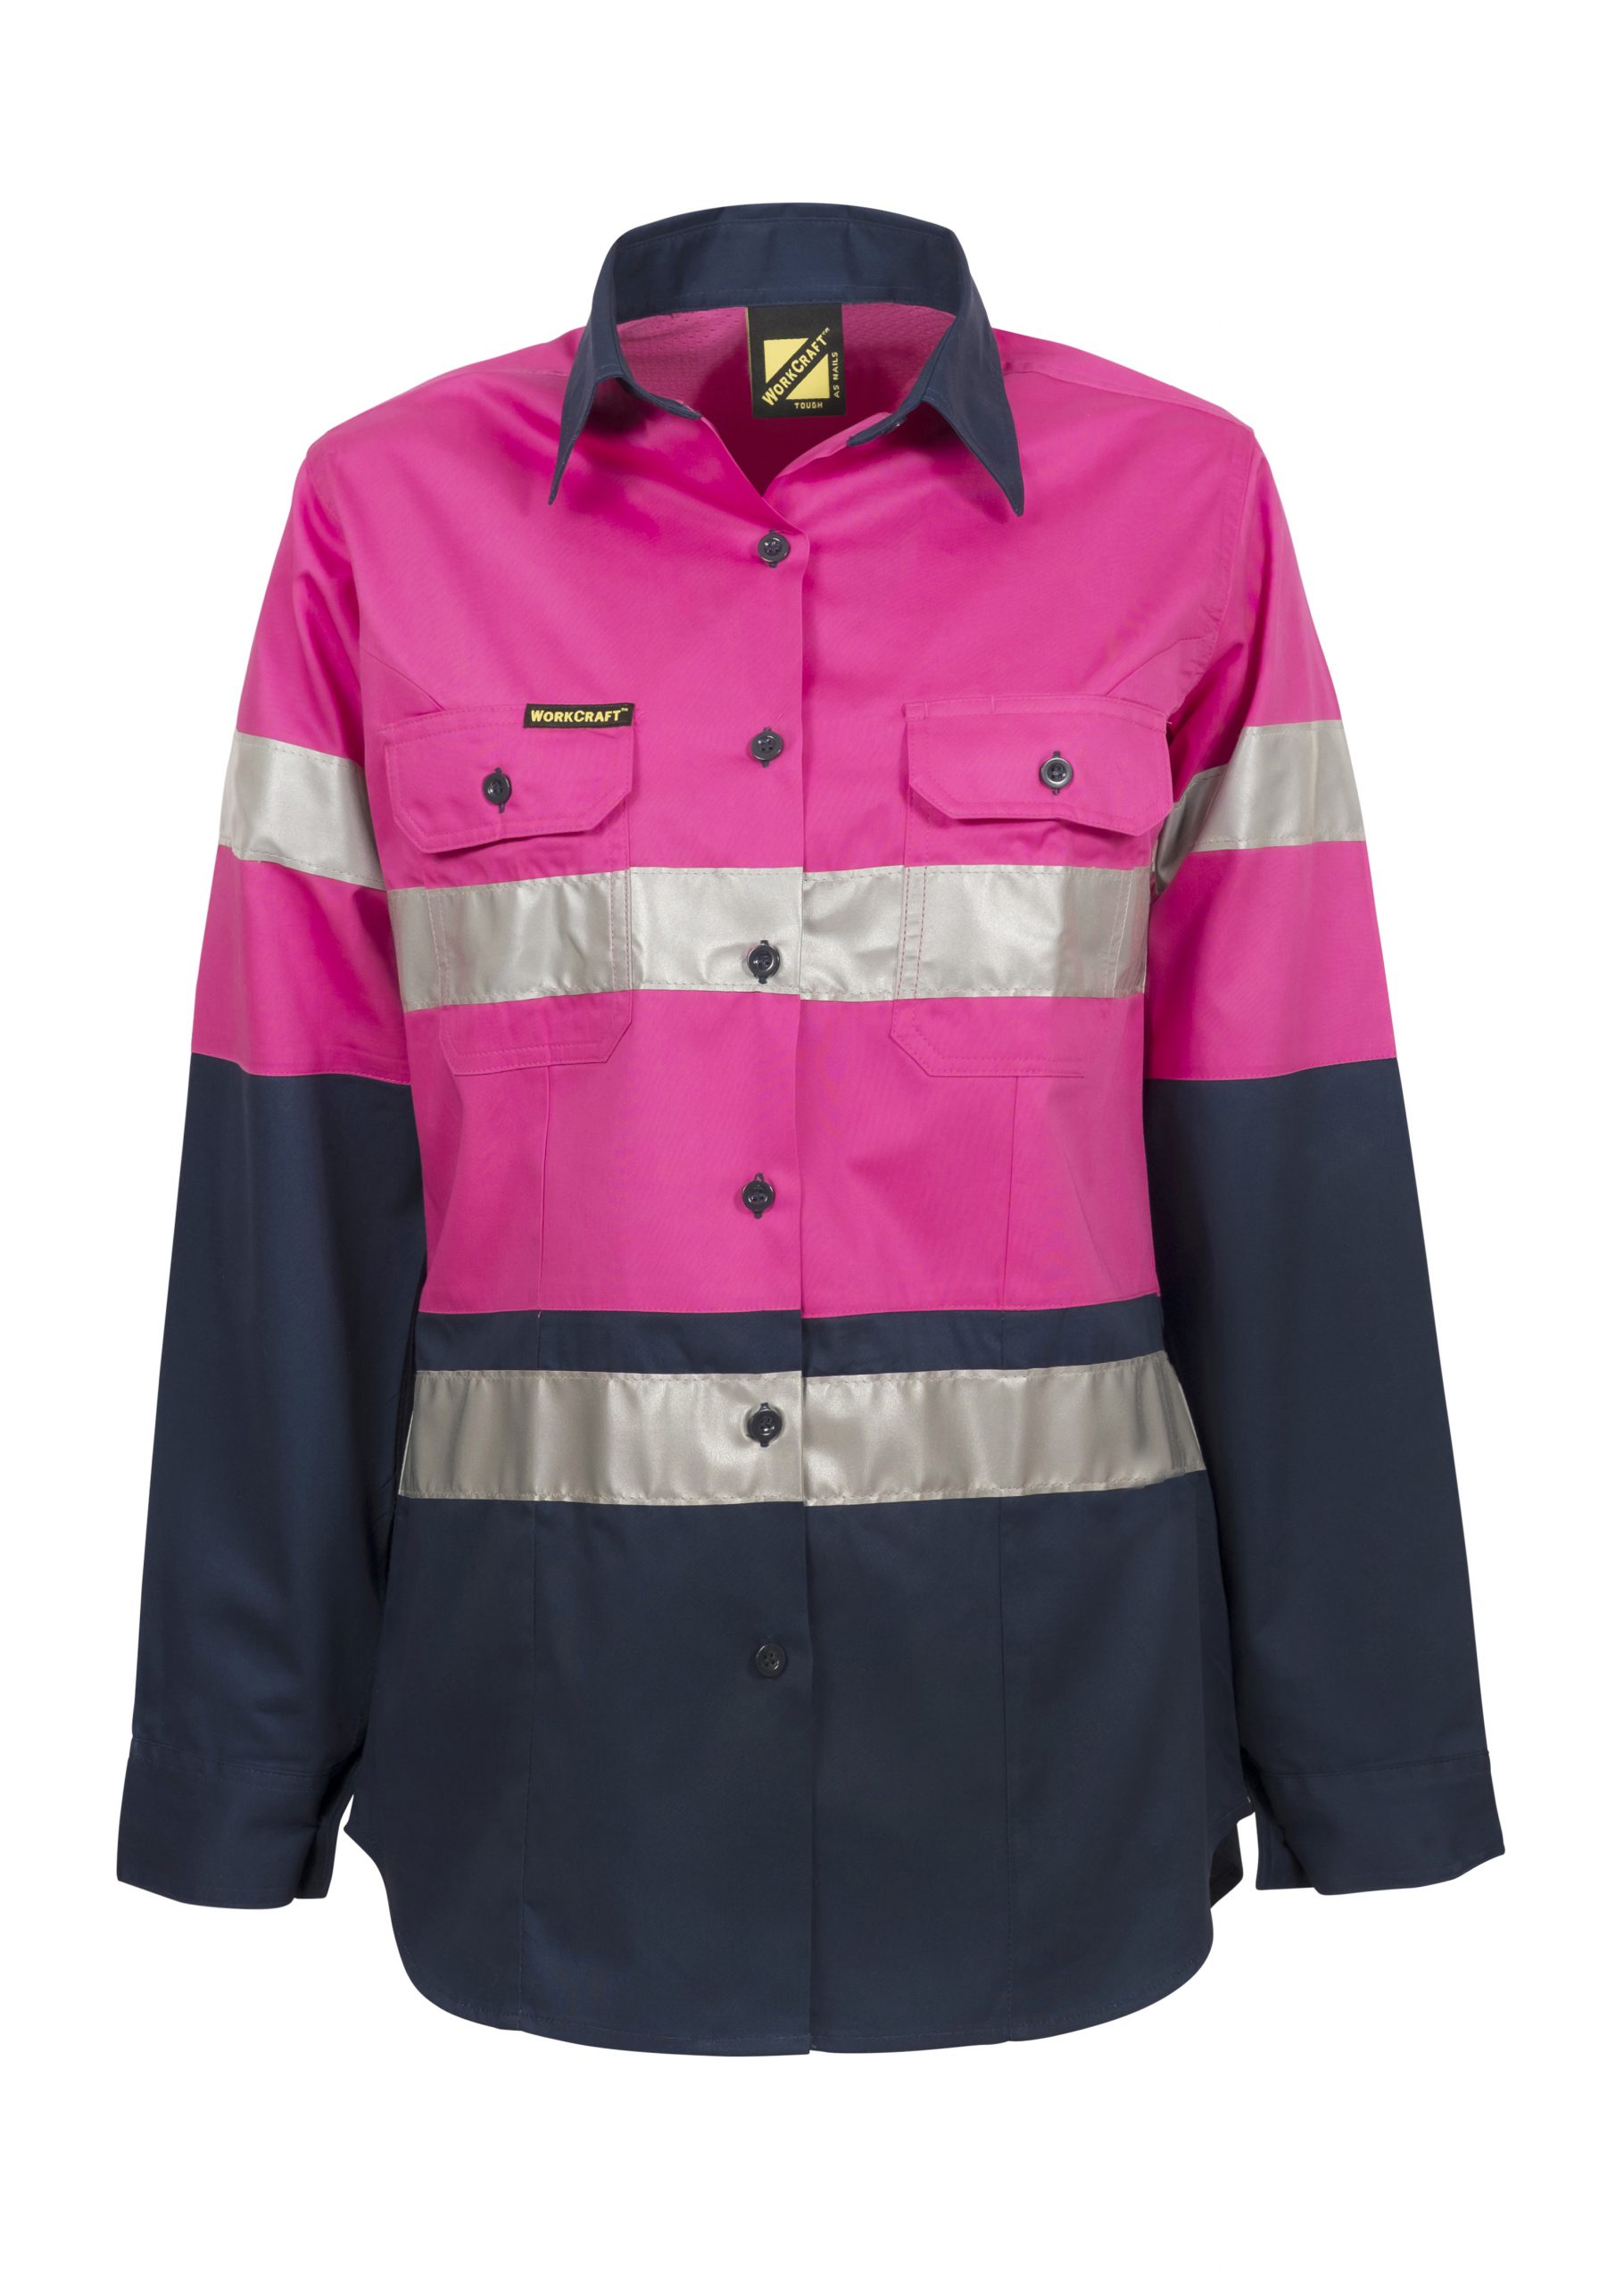 WSL503 Ladies Lightweight Hi Vis Two Tone Long Sleeve Vented Cotton Drill Shirt with CSR Reflective Tape PN1